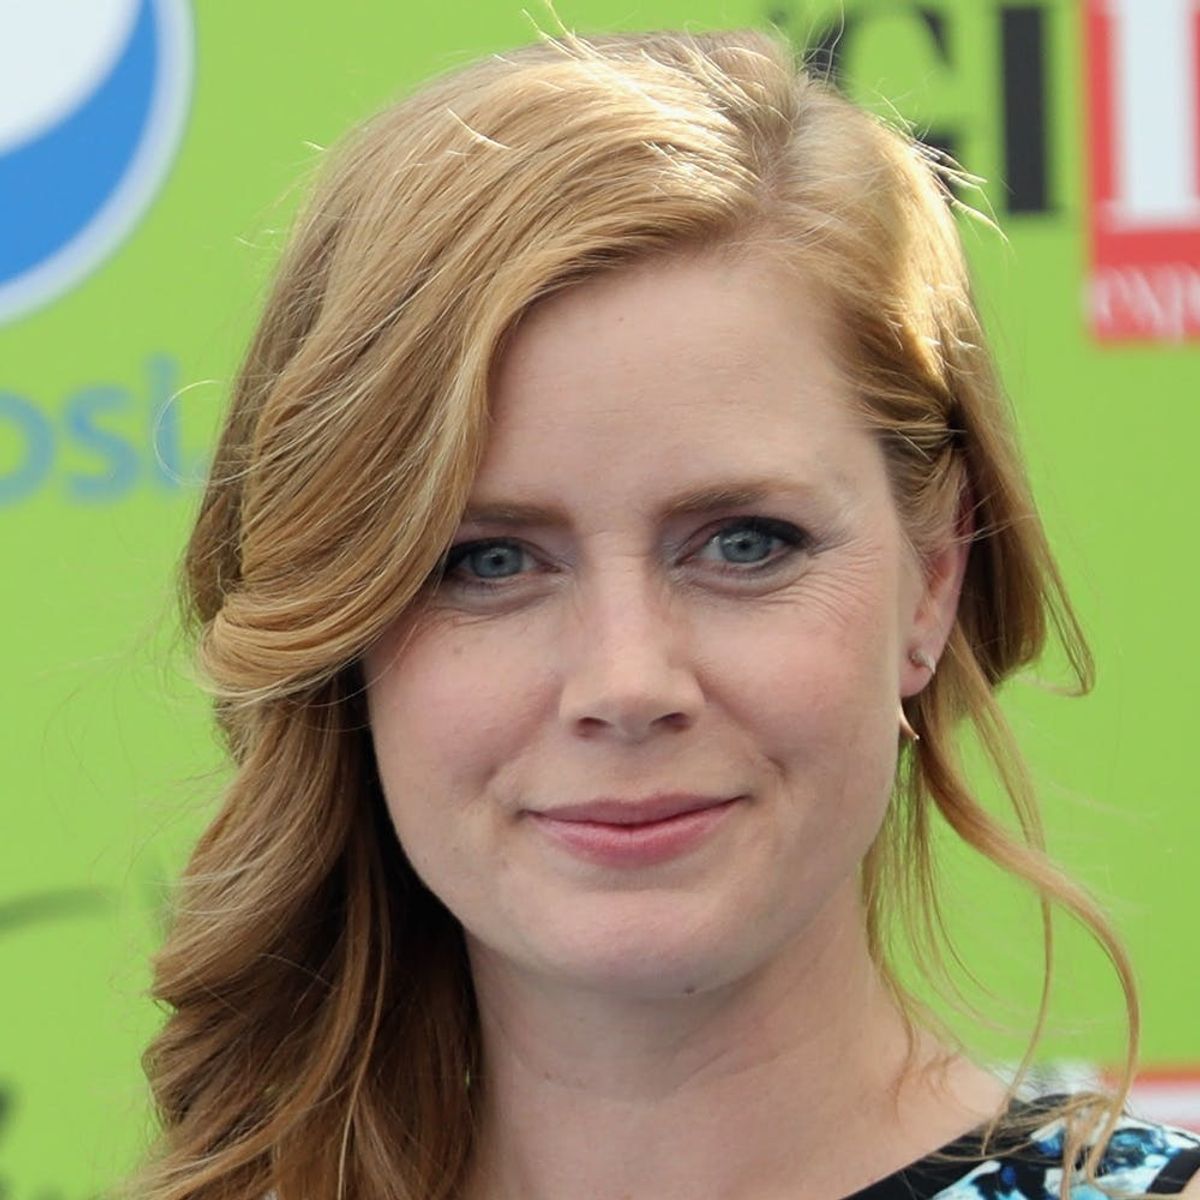 Amy Adams Just Rocked a Discounted $50 Dress on the Red Carpet